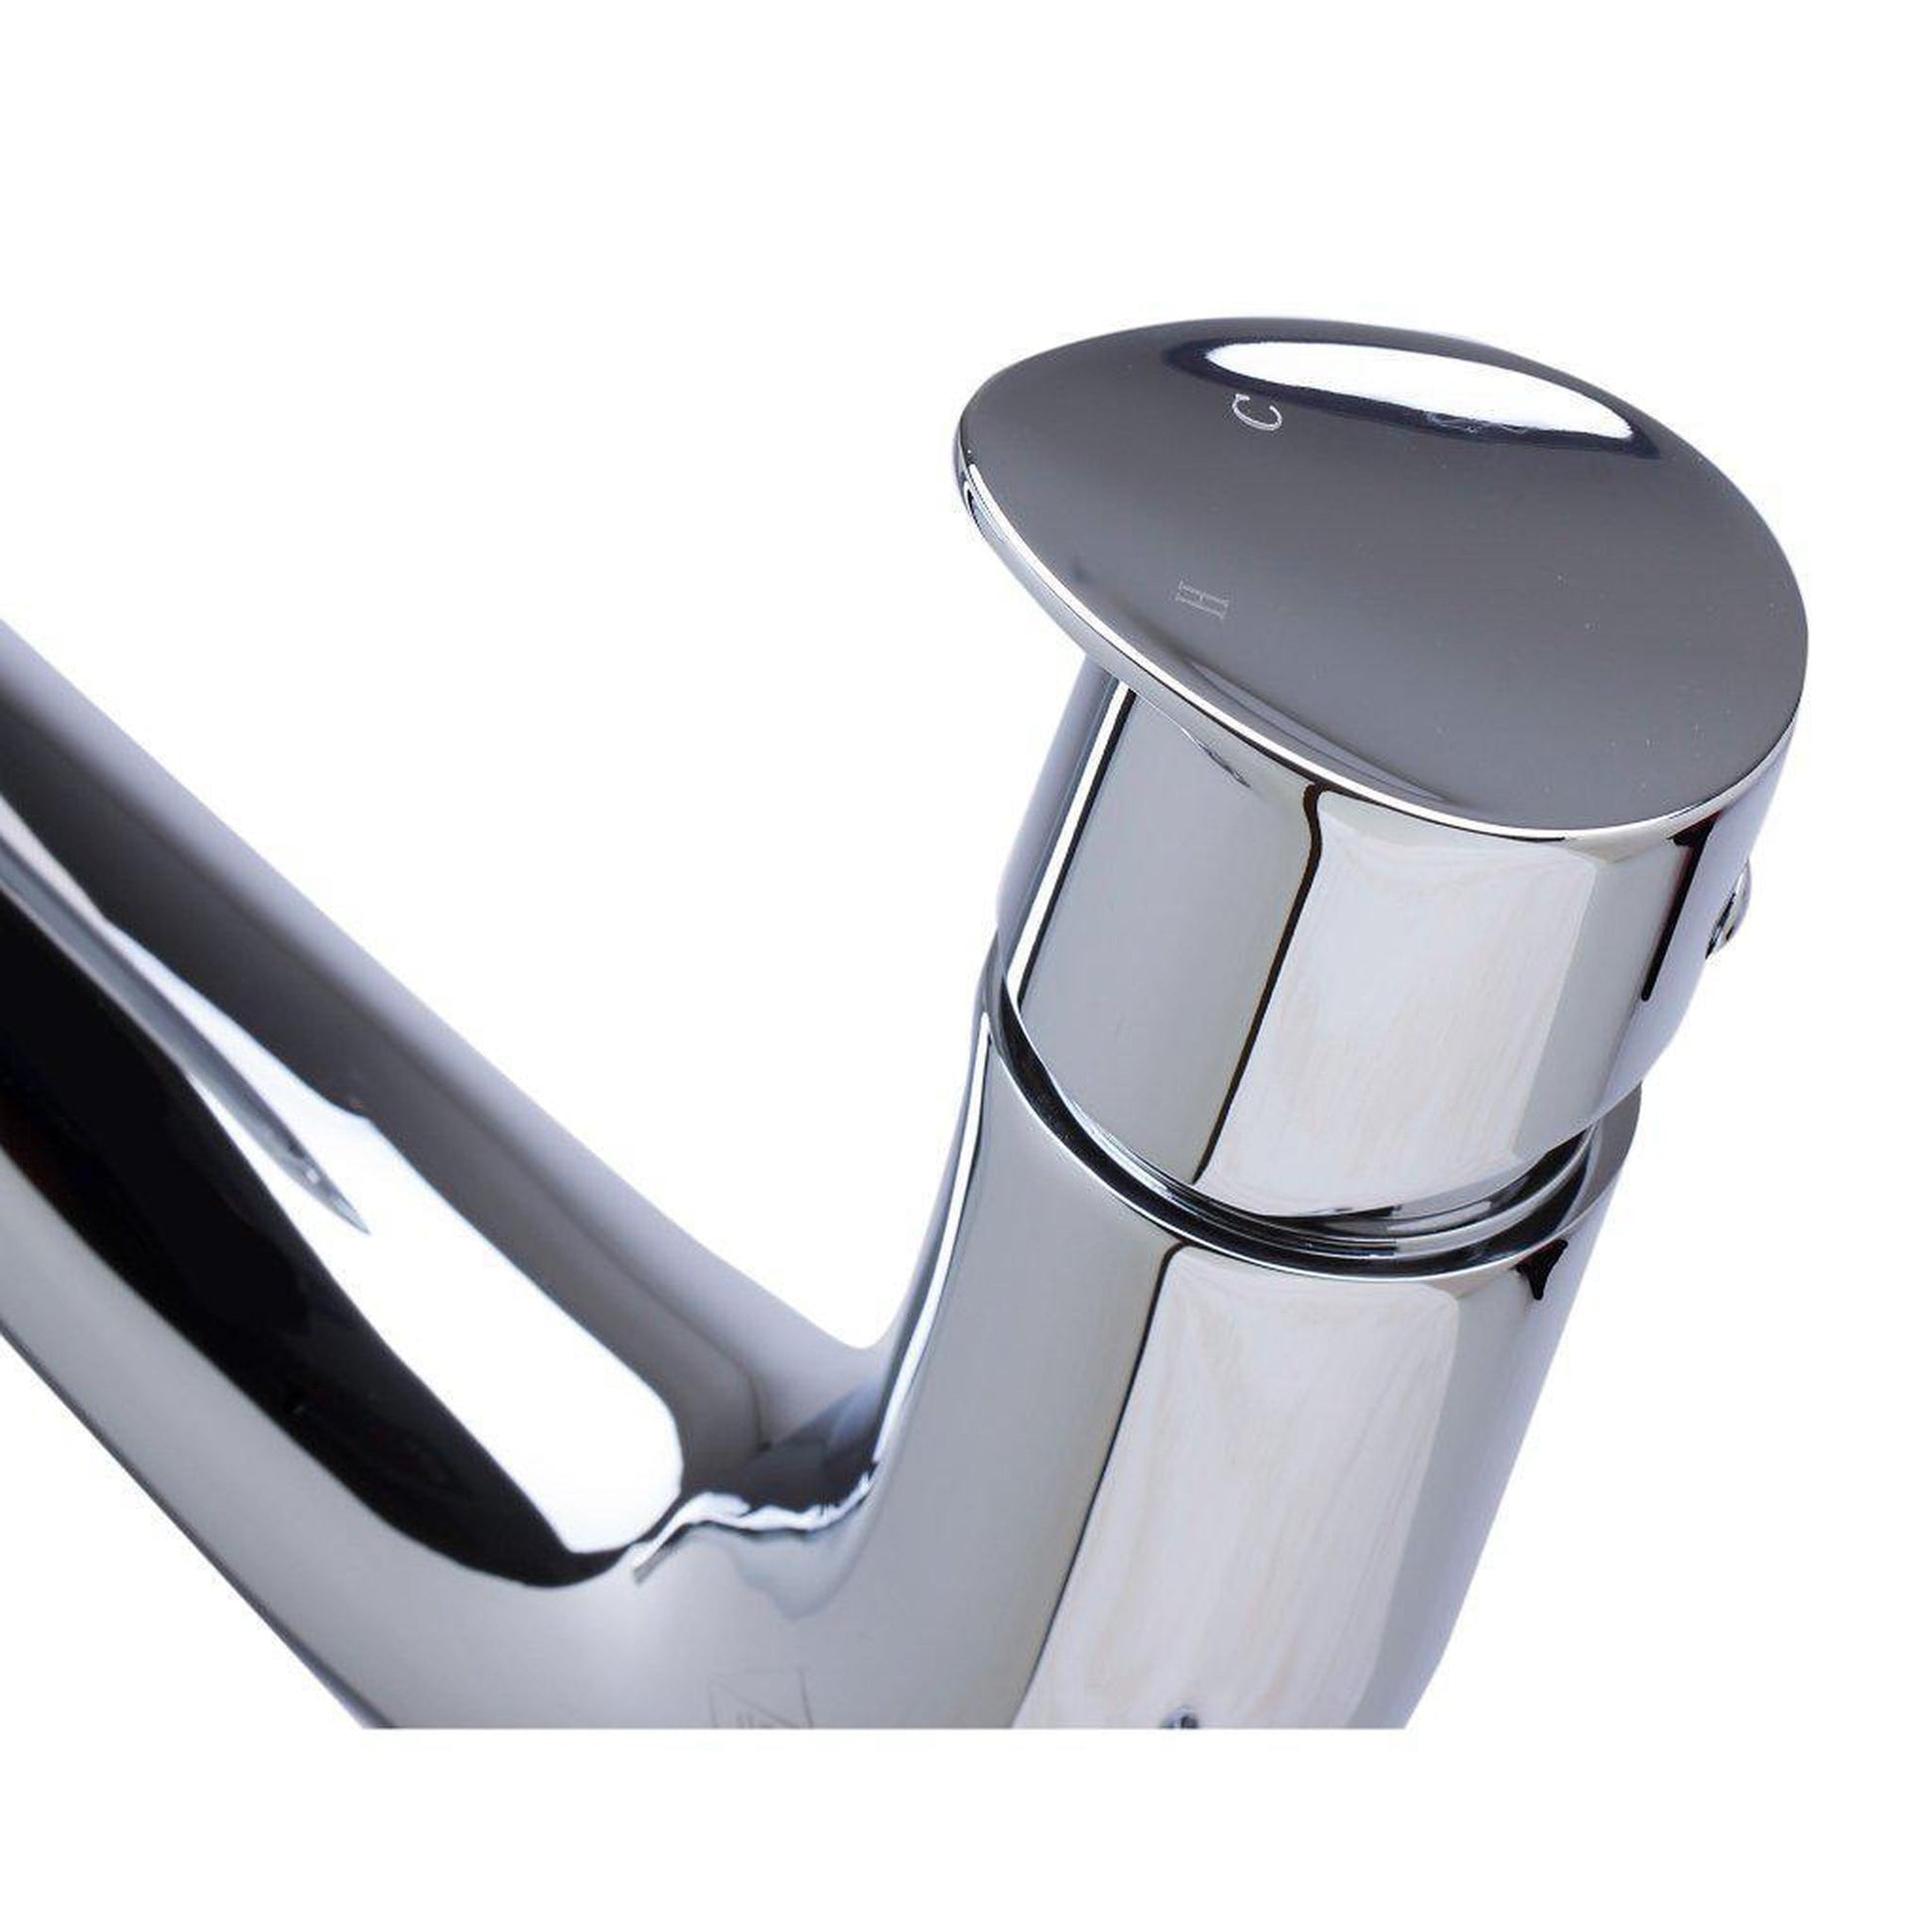 ALFI Brand AB1570-PC Polished Chrome Vessel Wave Spout Brass Bathroom Sink Faucet With Single Lever